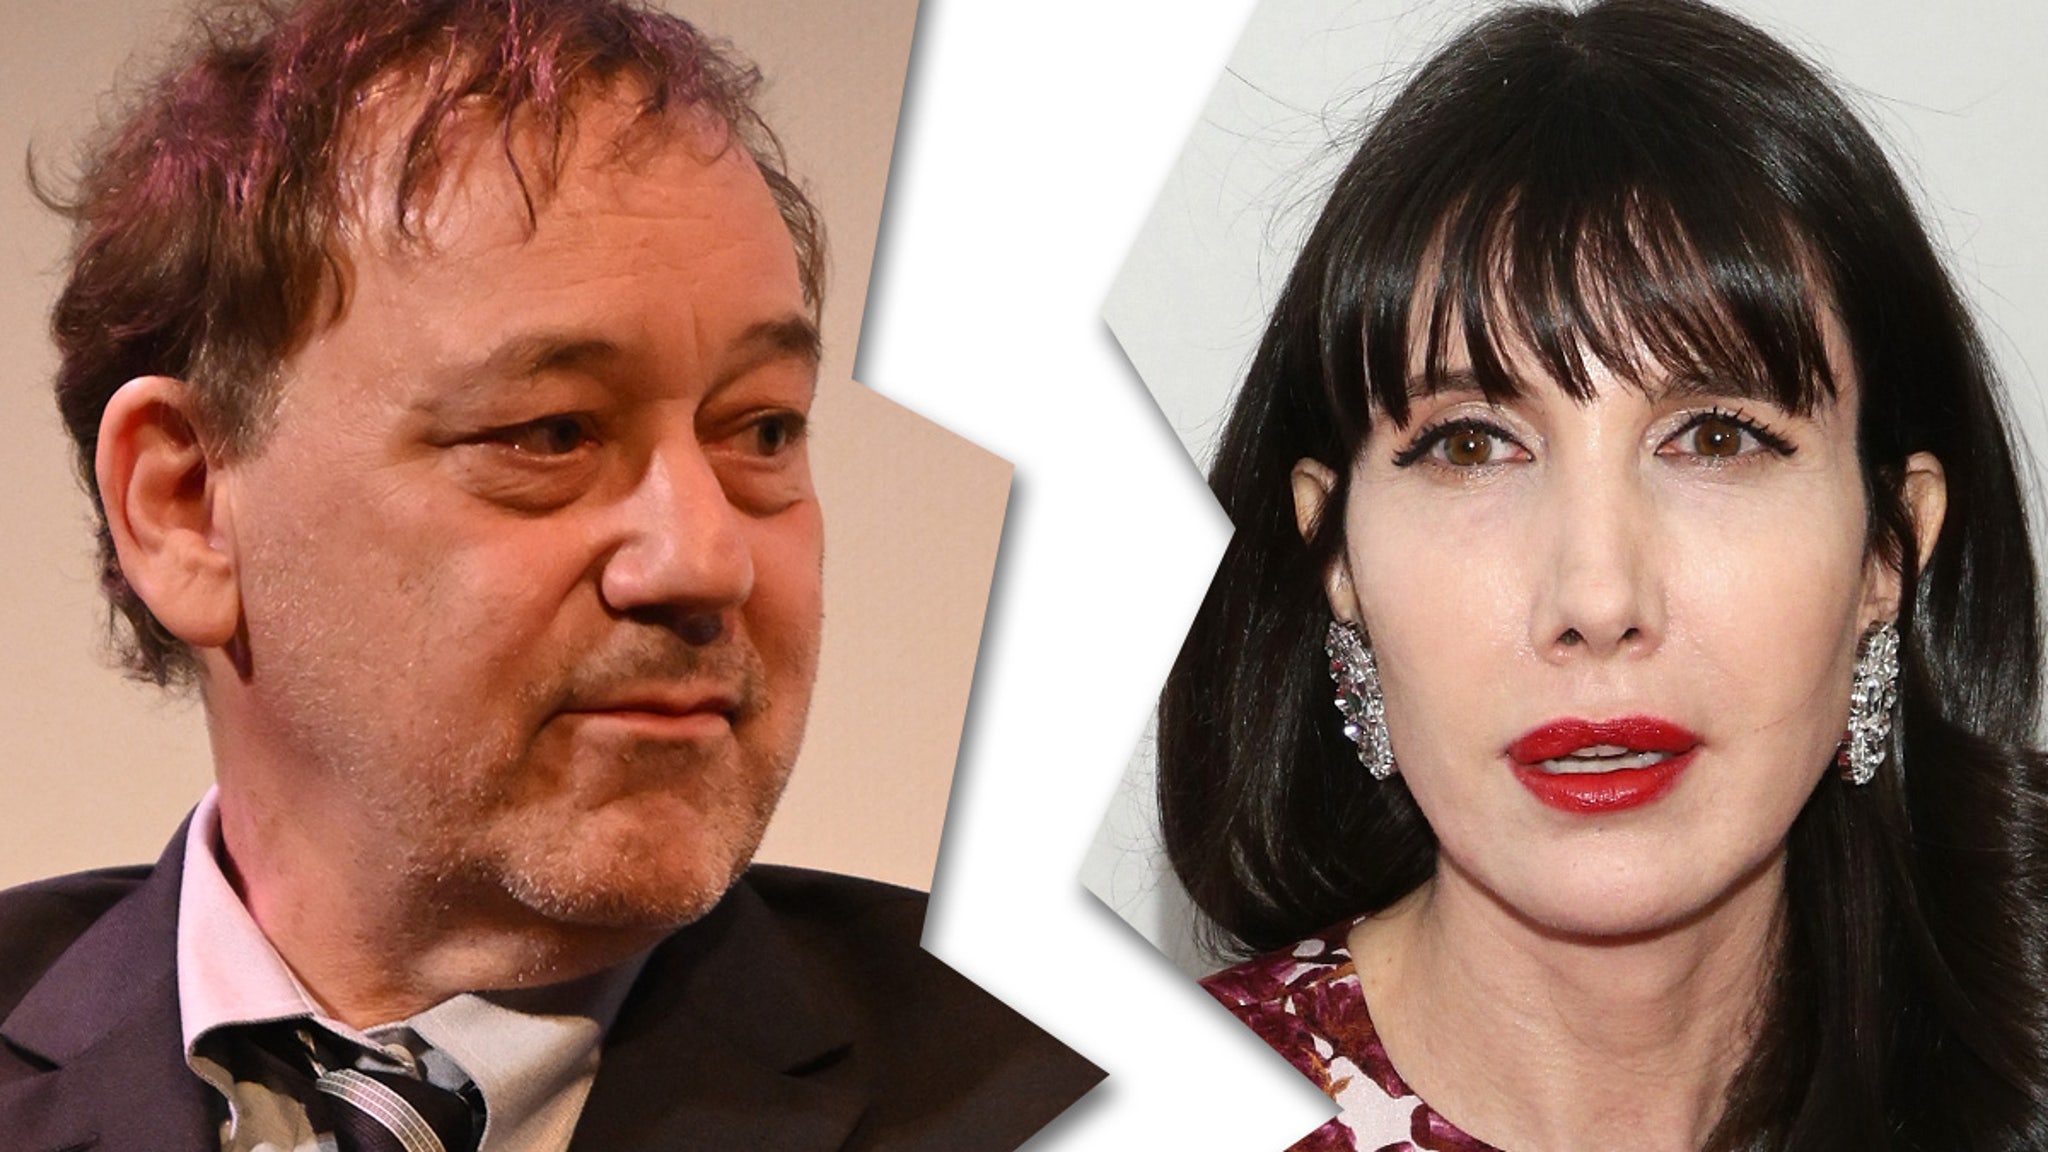 Director Sam Raimi's 31-year-old wife files for divorce